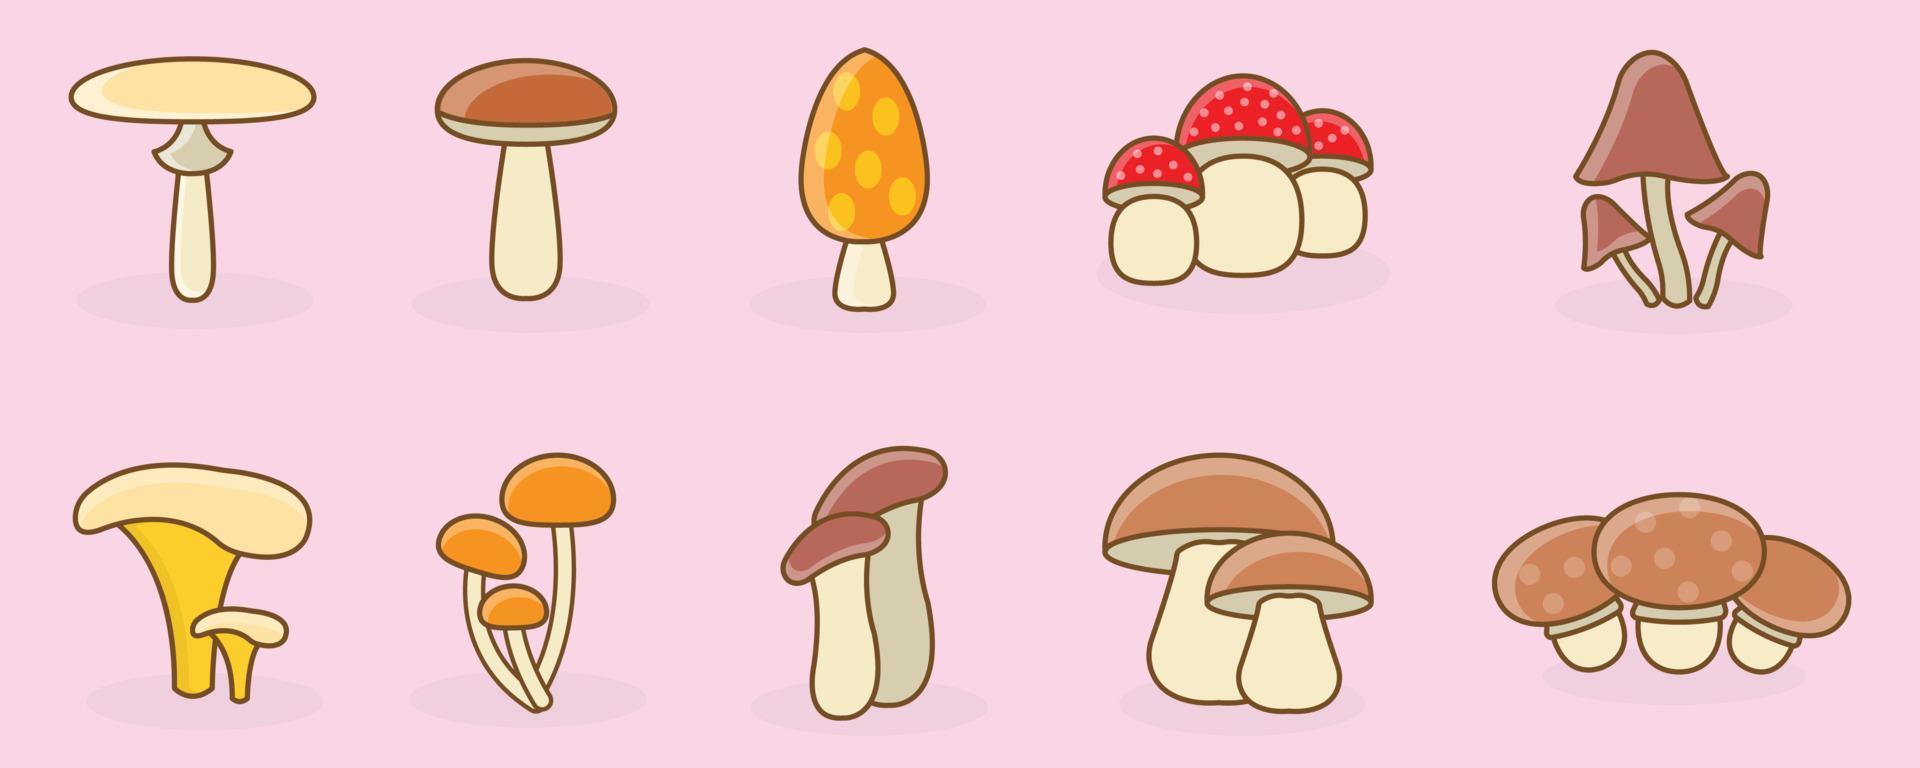 cute mushroom doodle art isolated on pink background vector